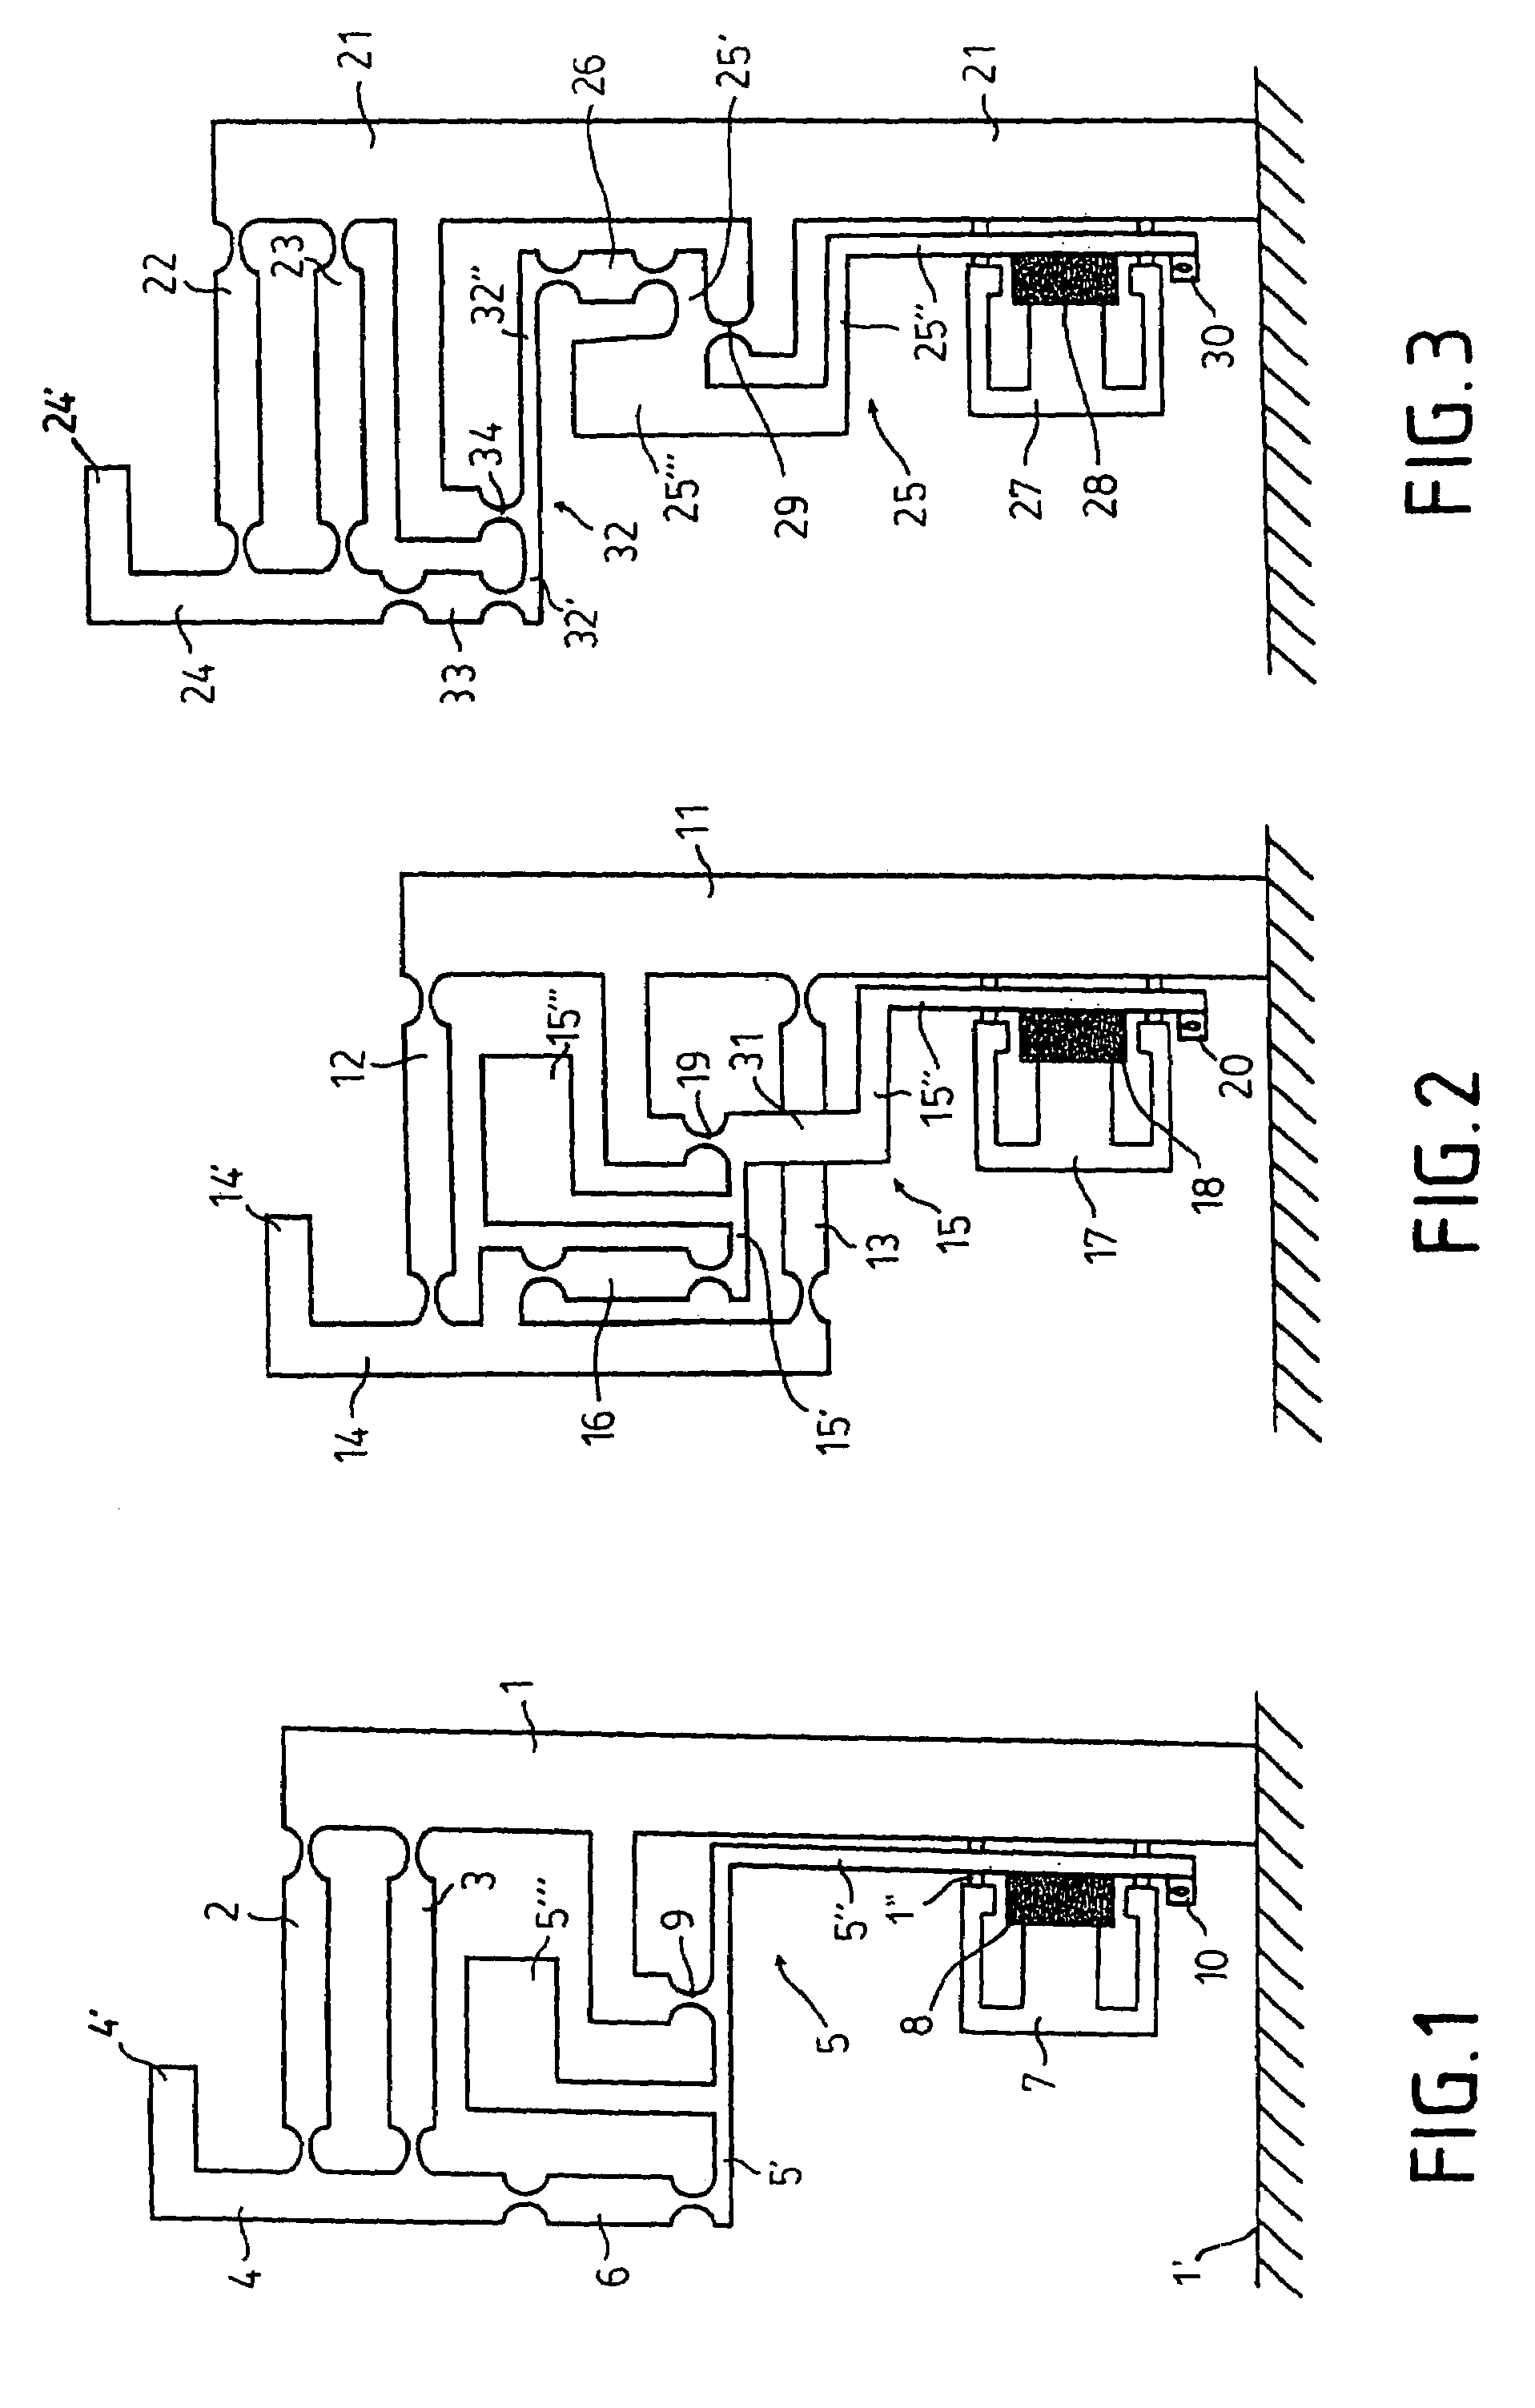 Weighing system having an angle lever with a long vertical lever arm